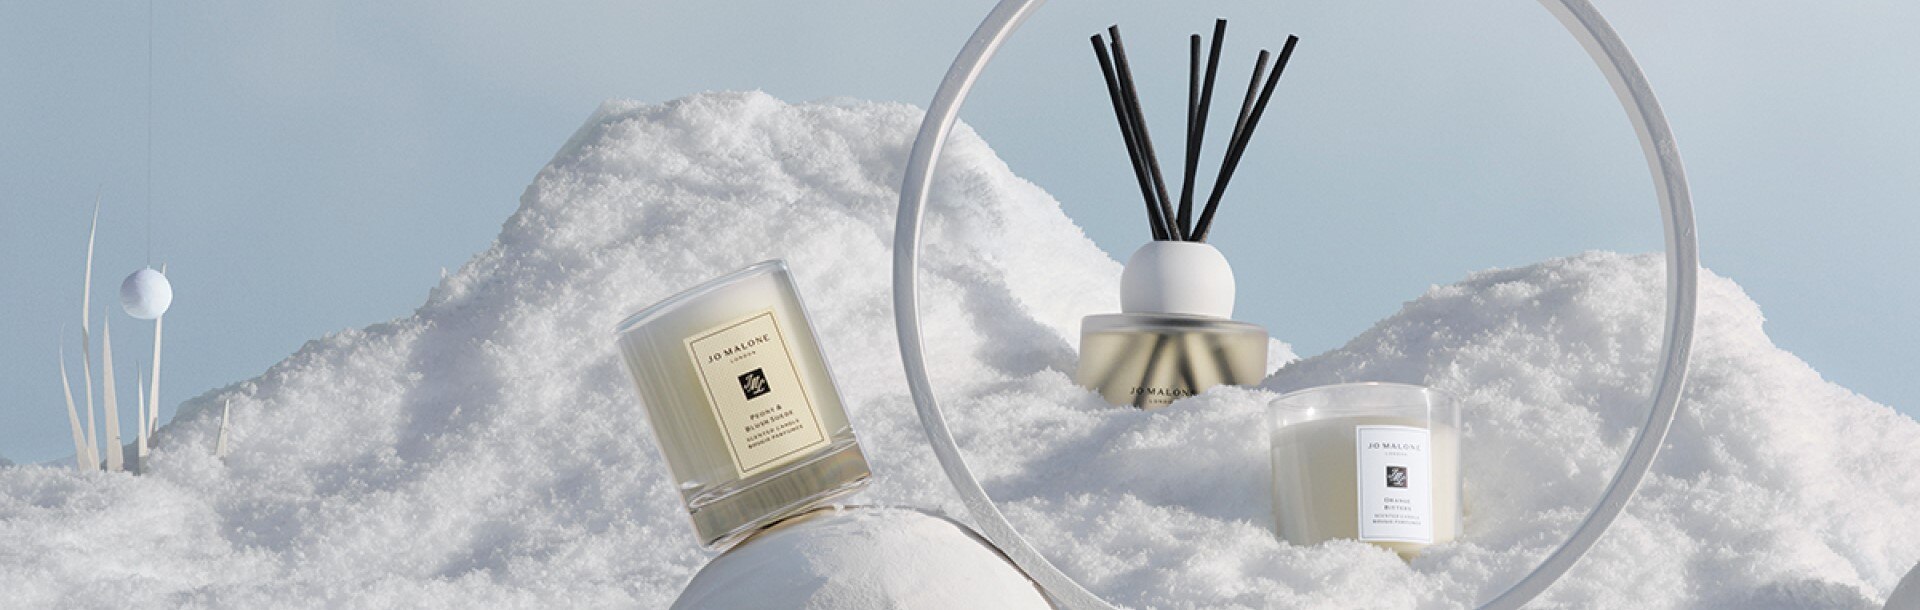 snowy background with travel candles, diffusers and miniature votive candles